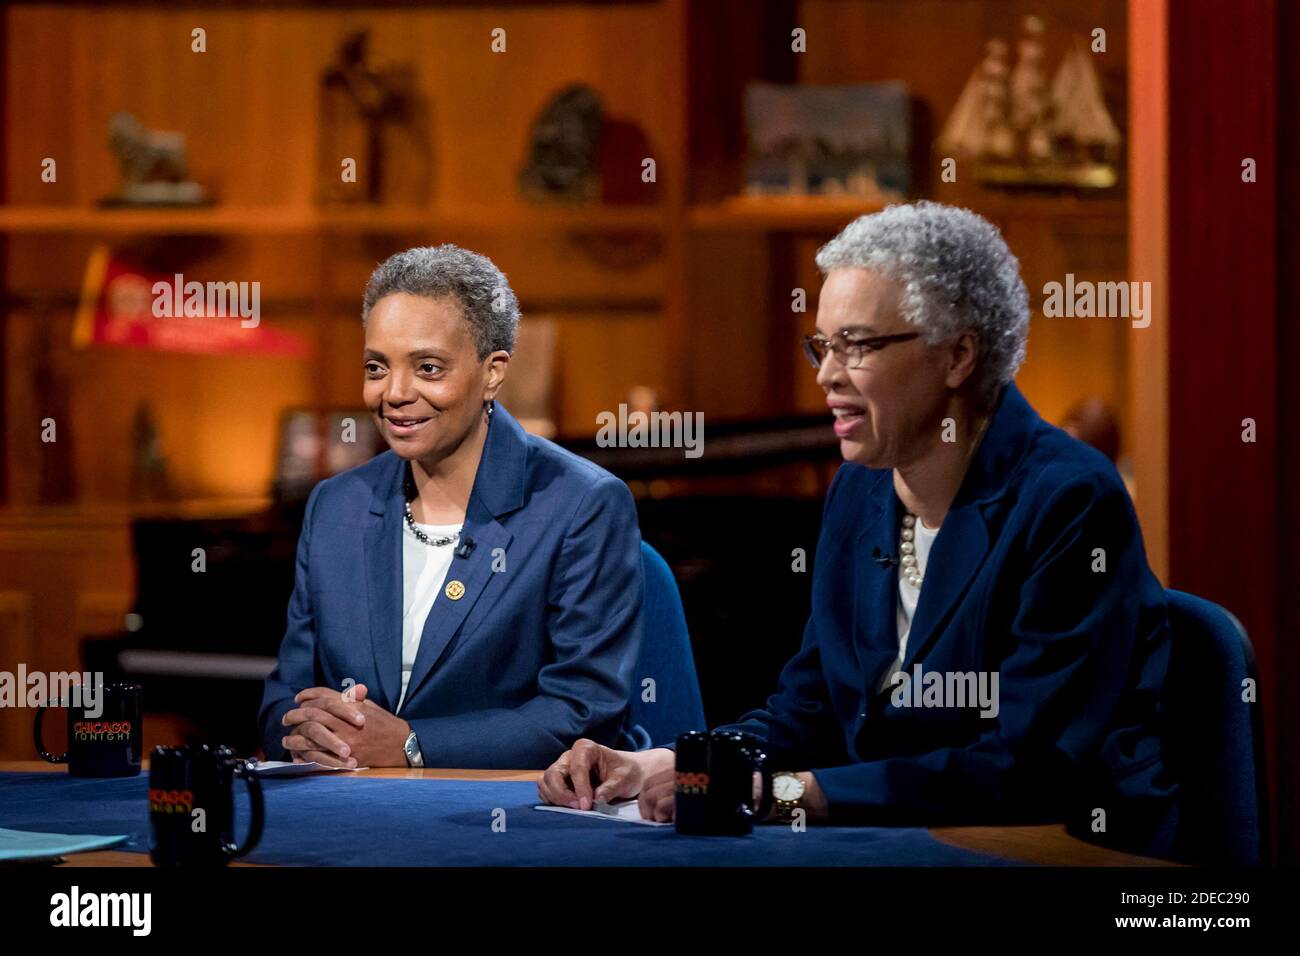 NO FILM, NO VIDEO, NO TV, NO DOCUMENTARY - Chicago mayoral candidates Lori Lightfoot and Toni Preckwinkle take their places before a forum Thursday, March 21, 2019 at WTTW. Photo by Brian Cassella/Chicago Tribune/TNS/ABACAPRESS.COM Stock Photo